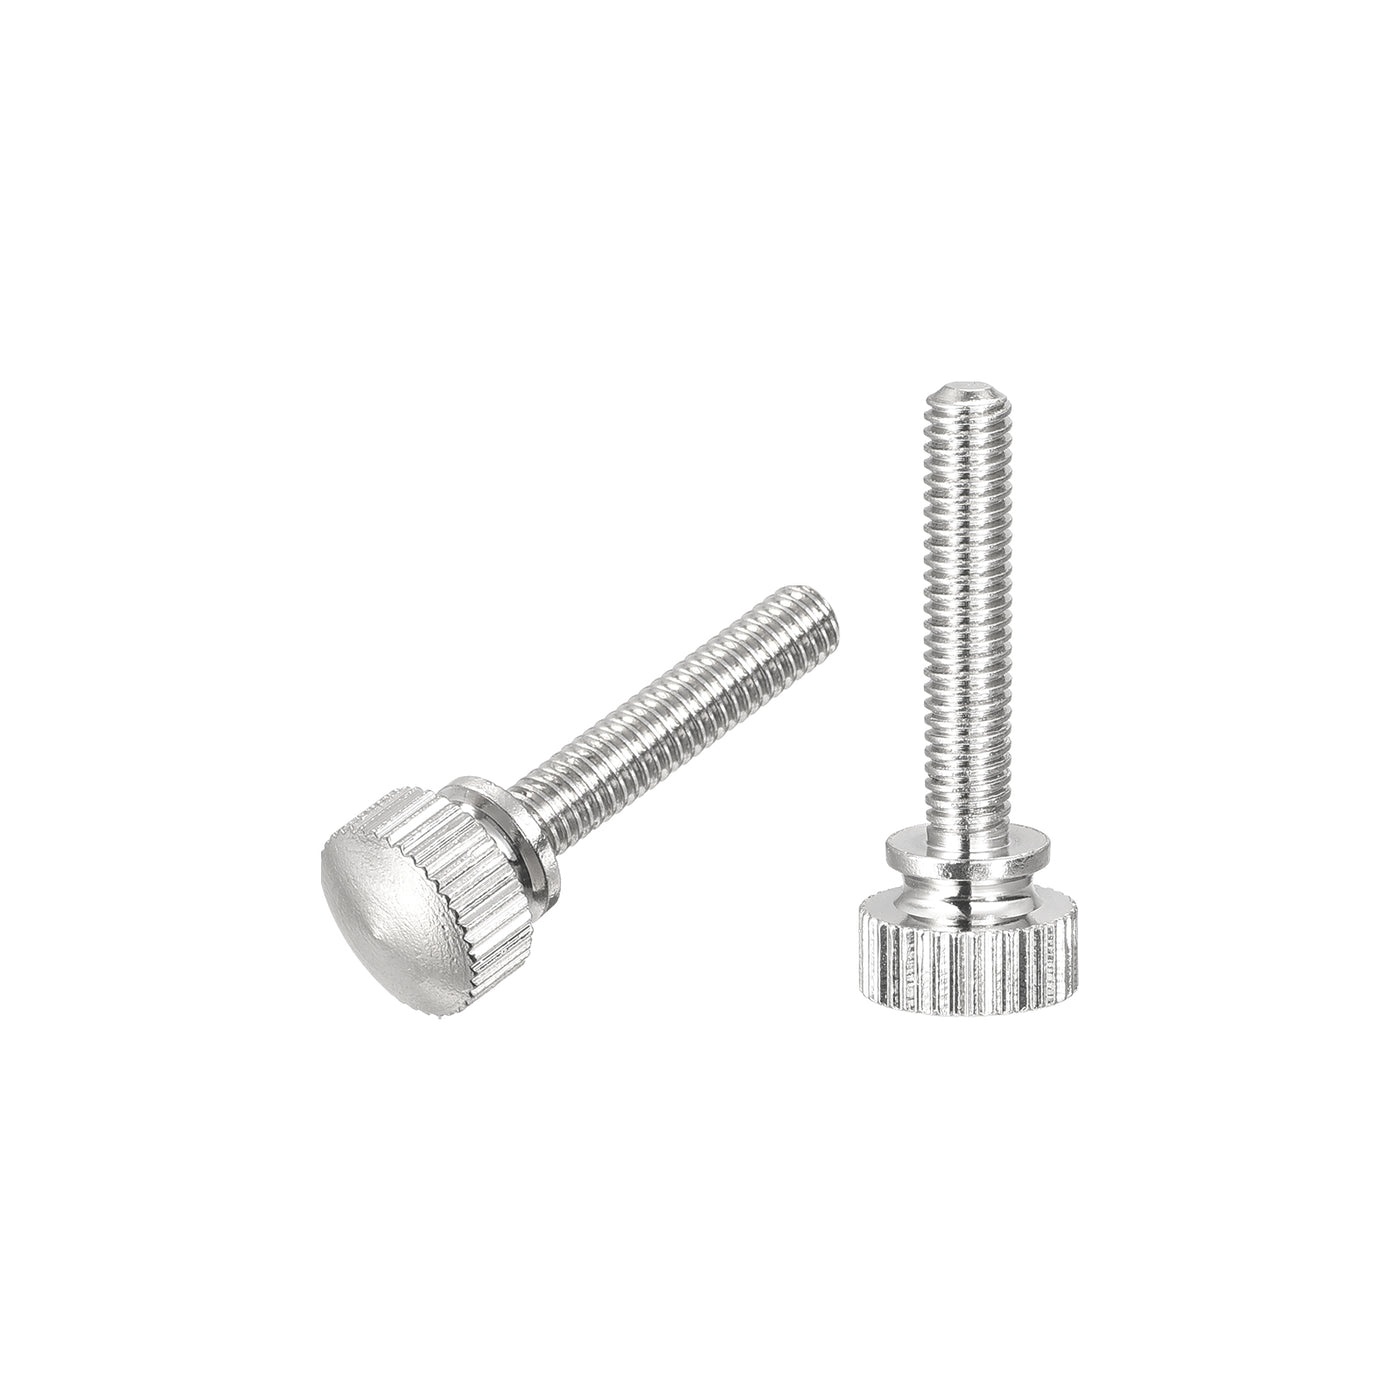 uxcell Uxcell Knurled Thumb Screws, M4x20mm Brass Shoulder Bolts Grip Knobs Fasteners, Nickel Plated 2Pcs